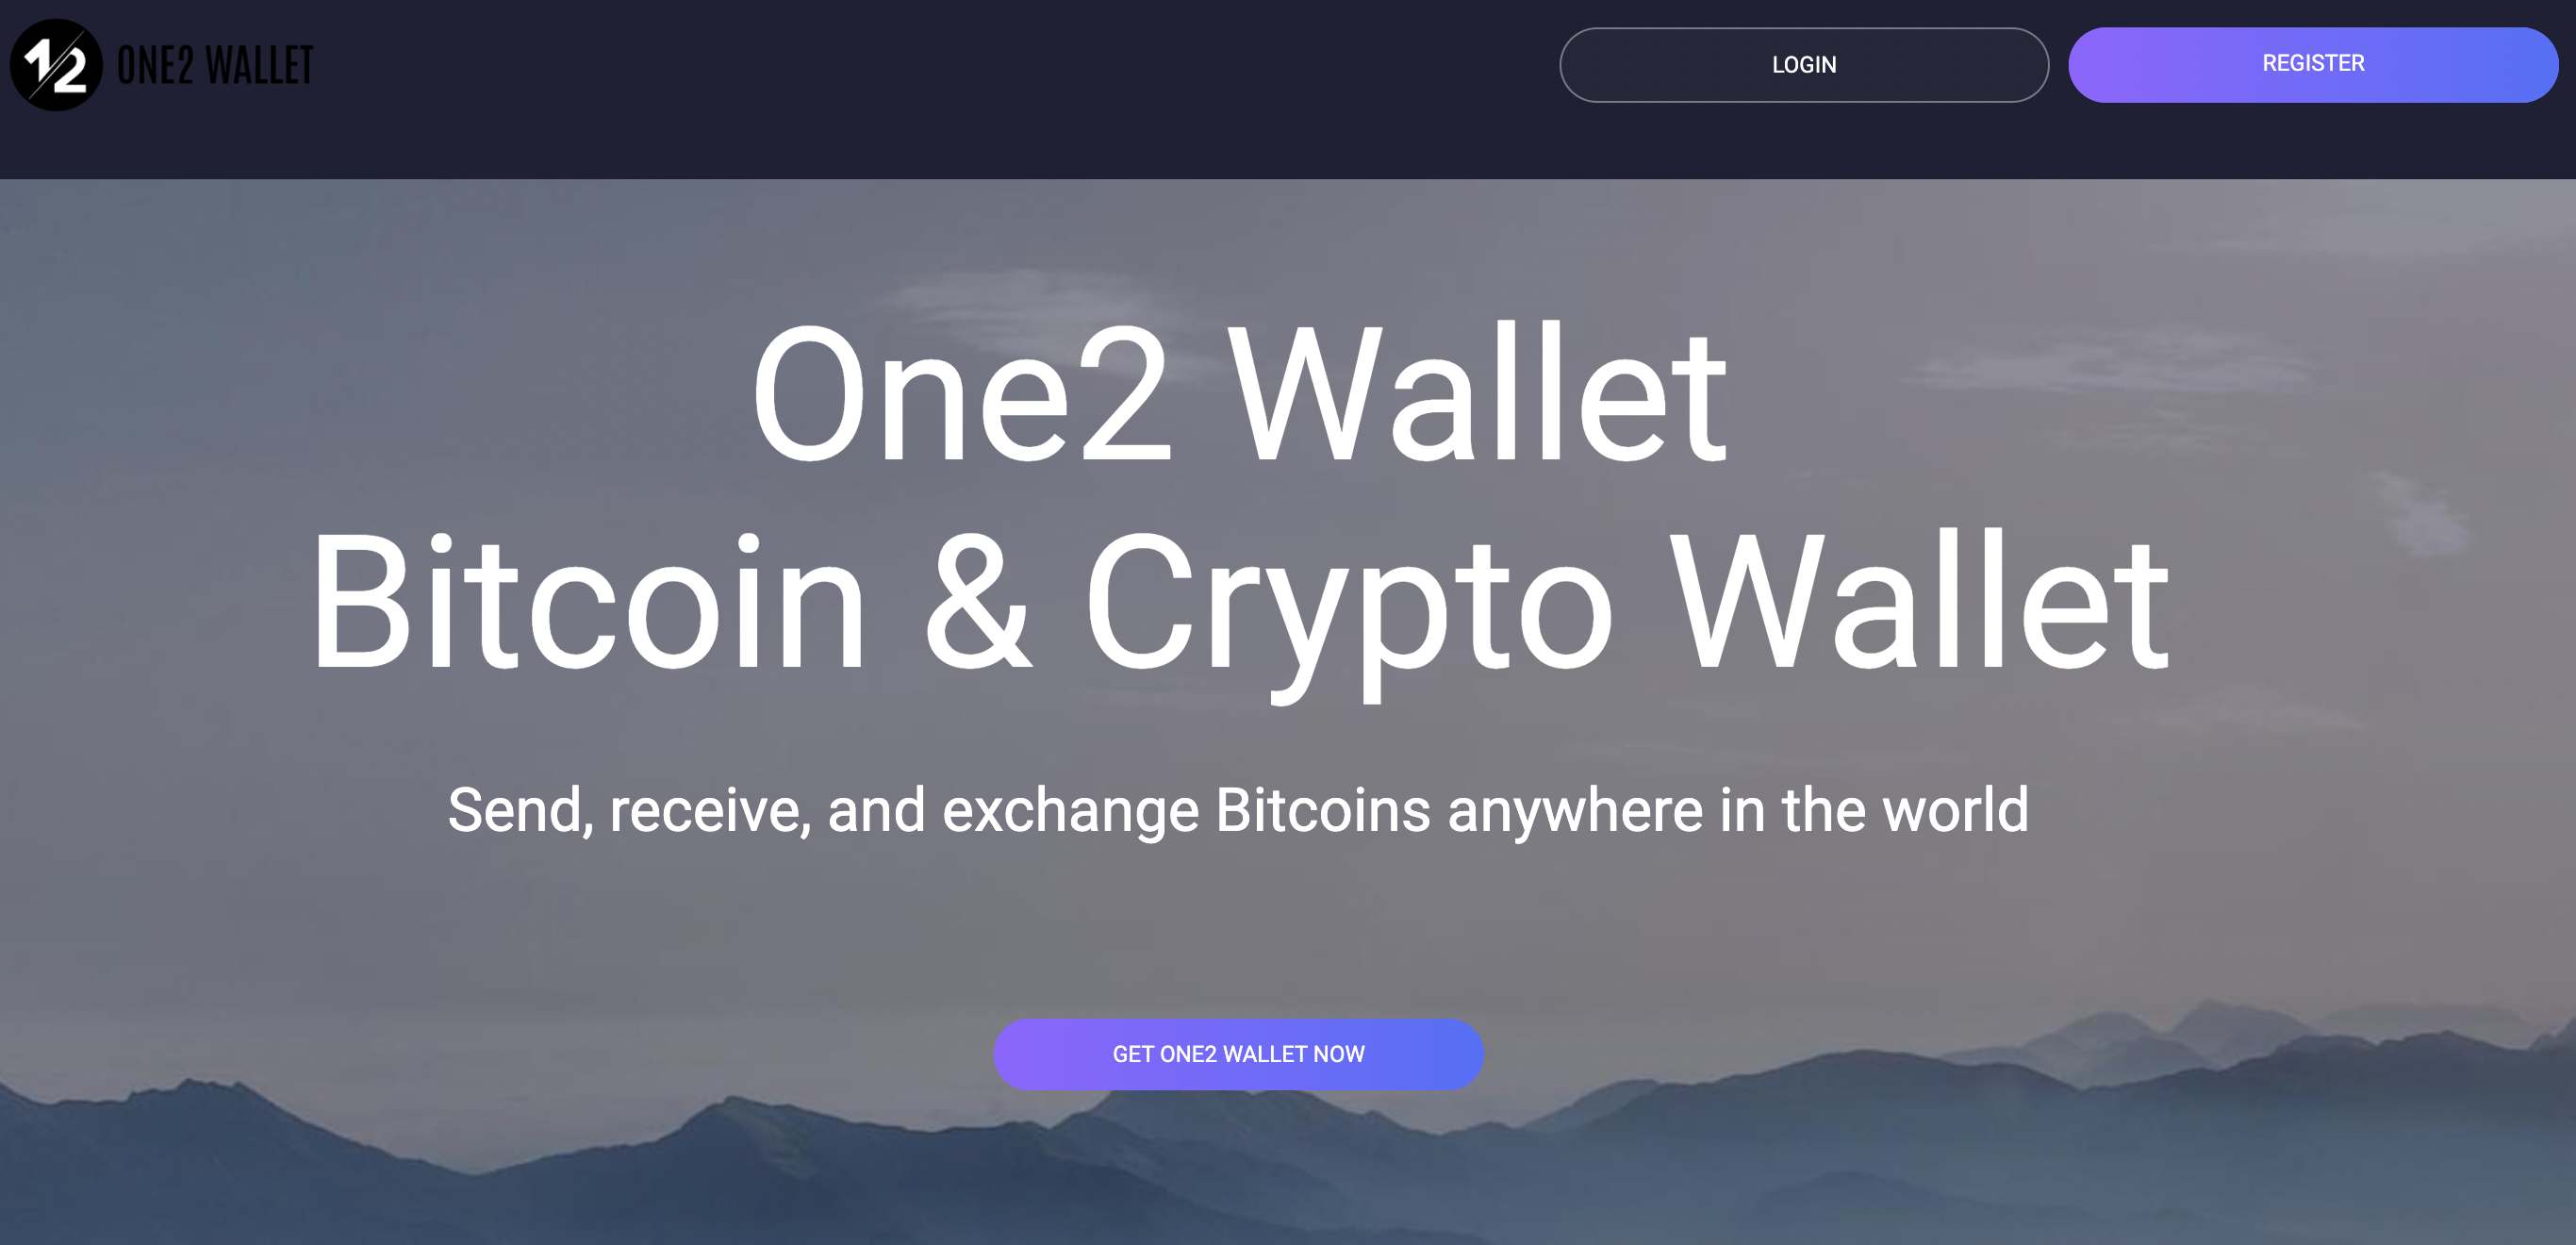 One2 Wallet